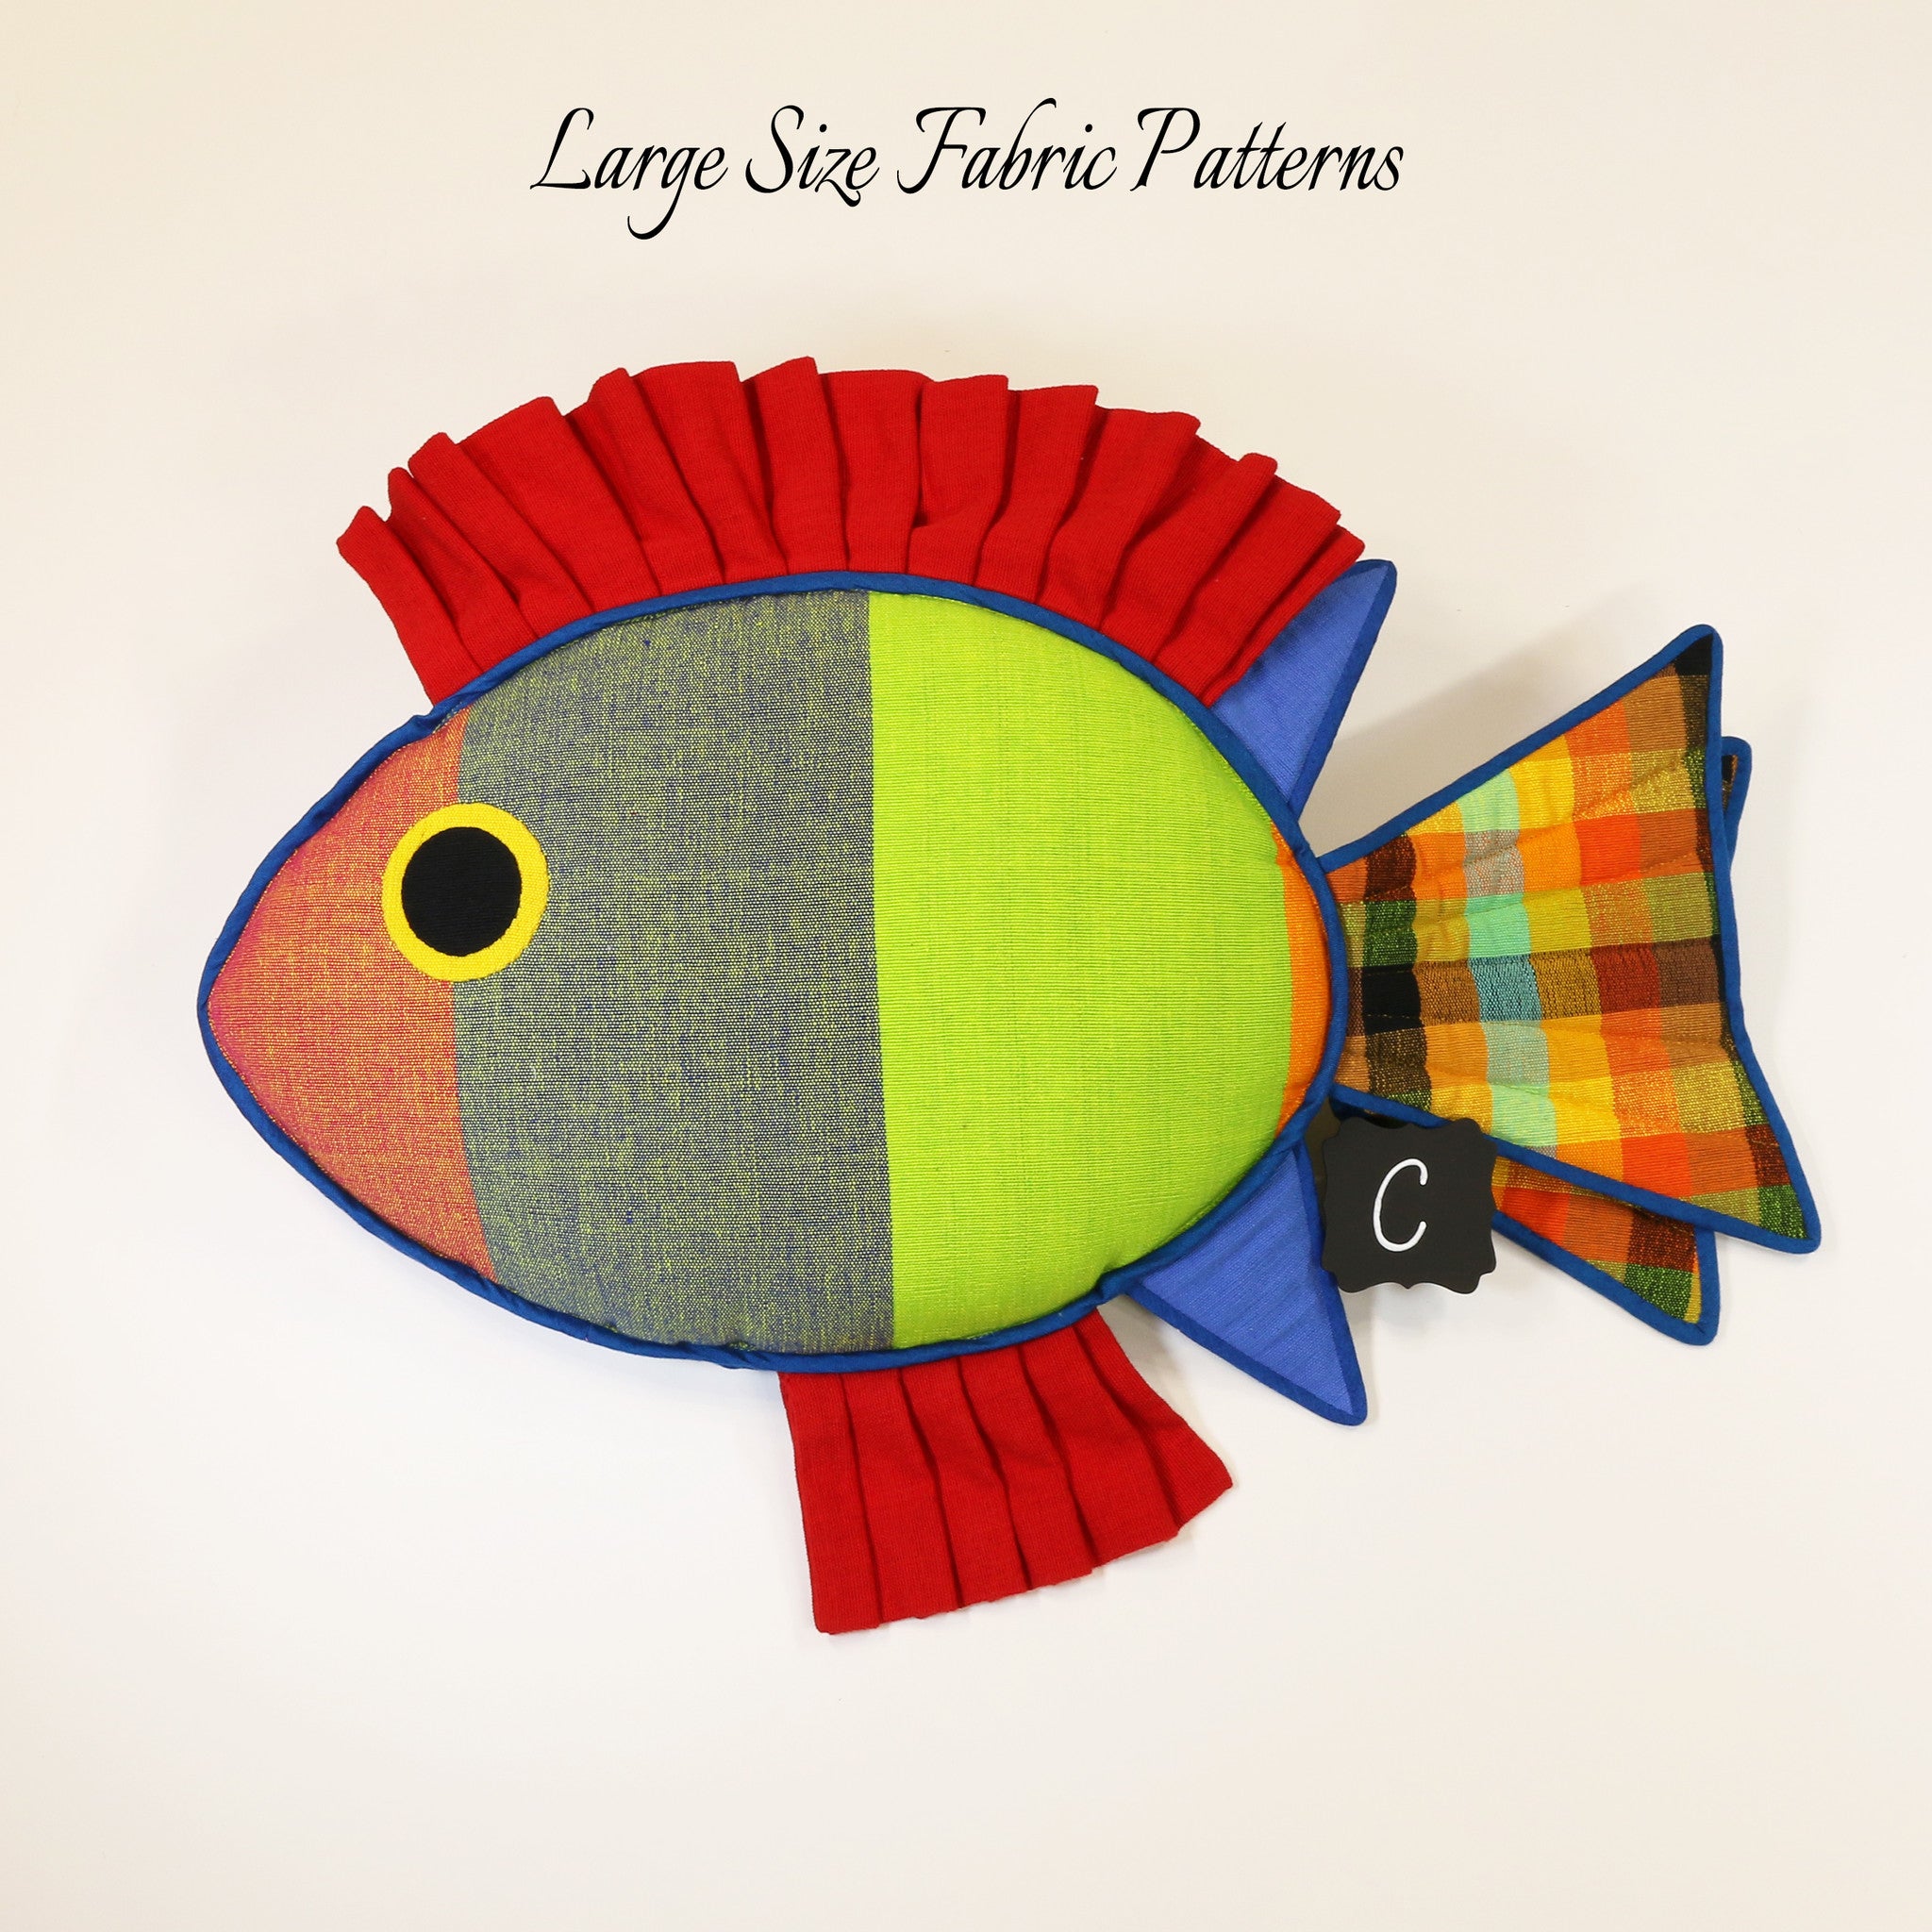 Kirby, the Rabbit Fish – large size fabric patterns shown